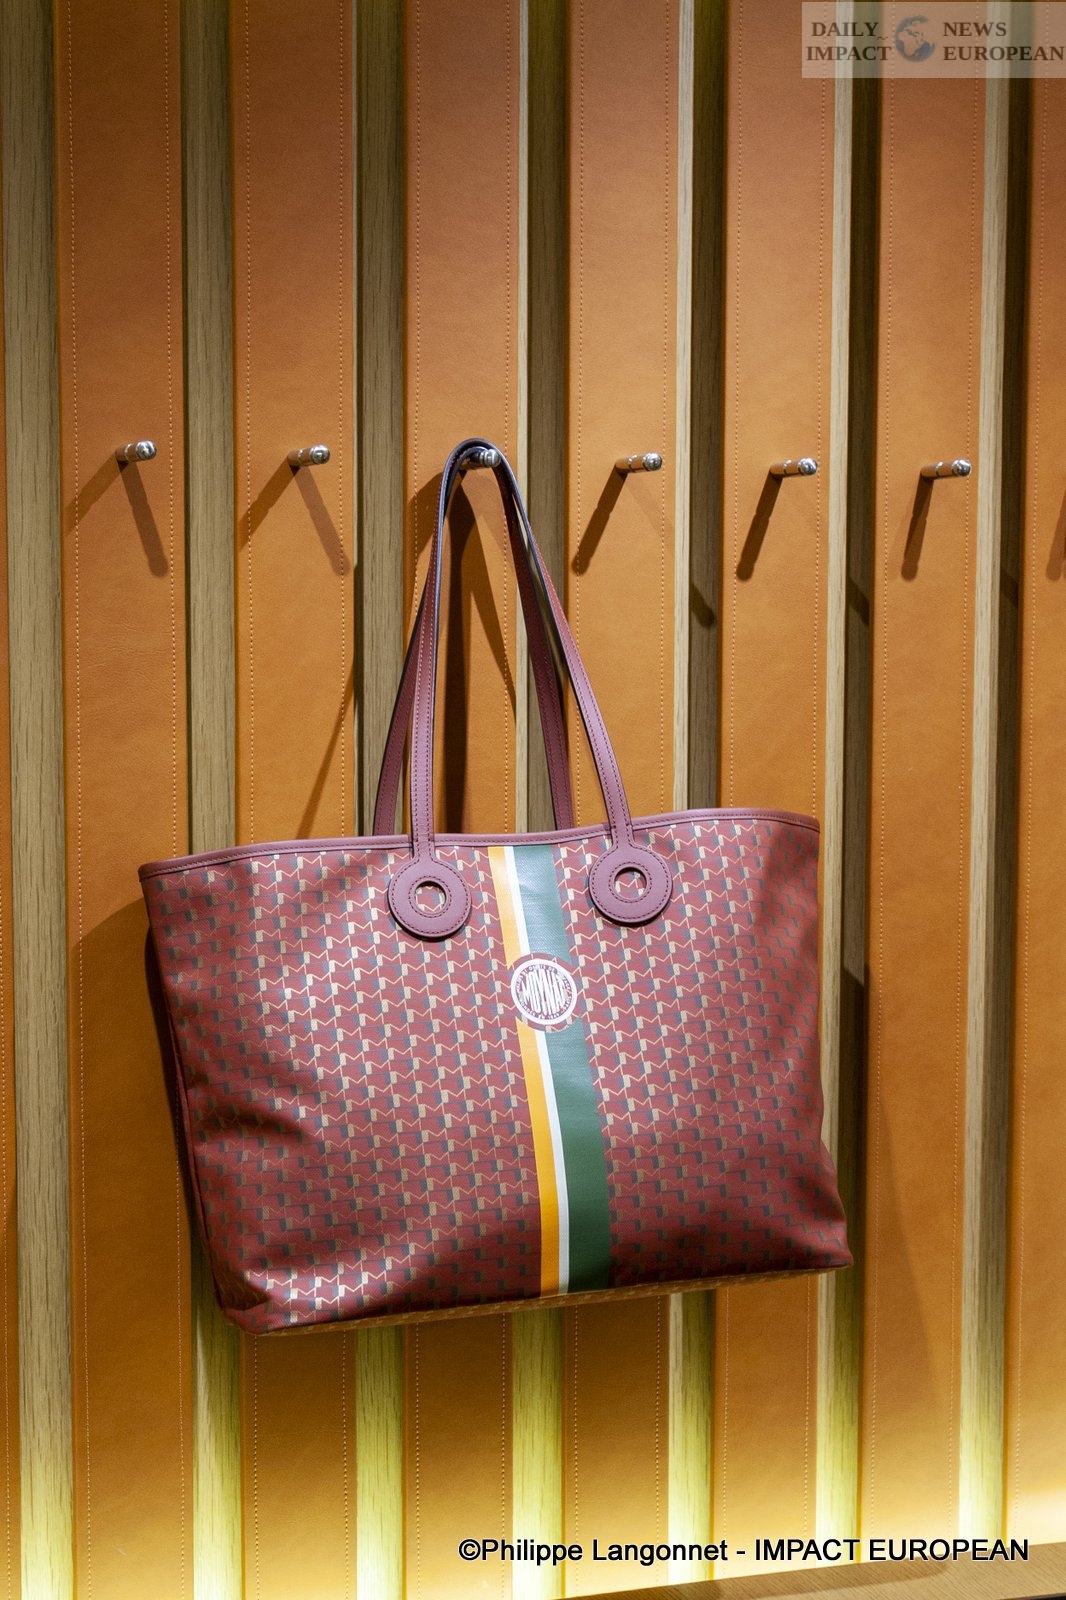 MOYNAT, ONE OF THE OLDEST FRENCH TRUNK-MAKERS » Daily Impact European